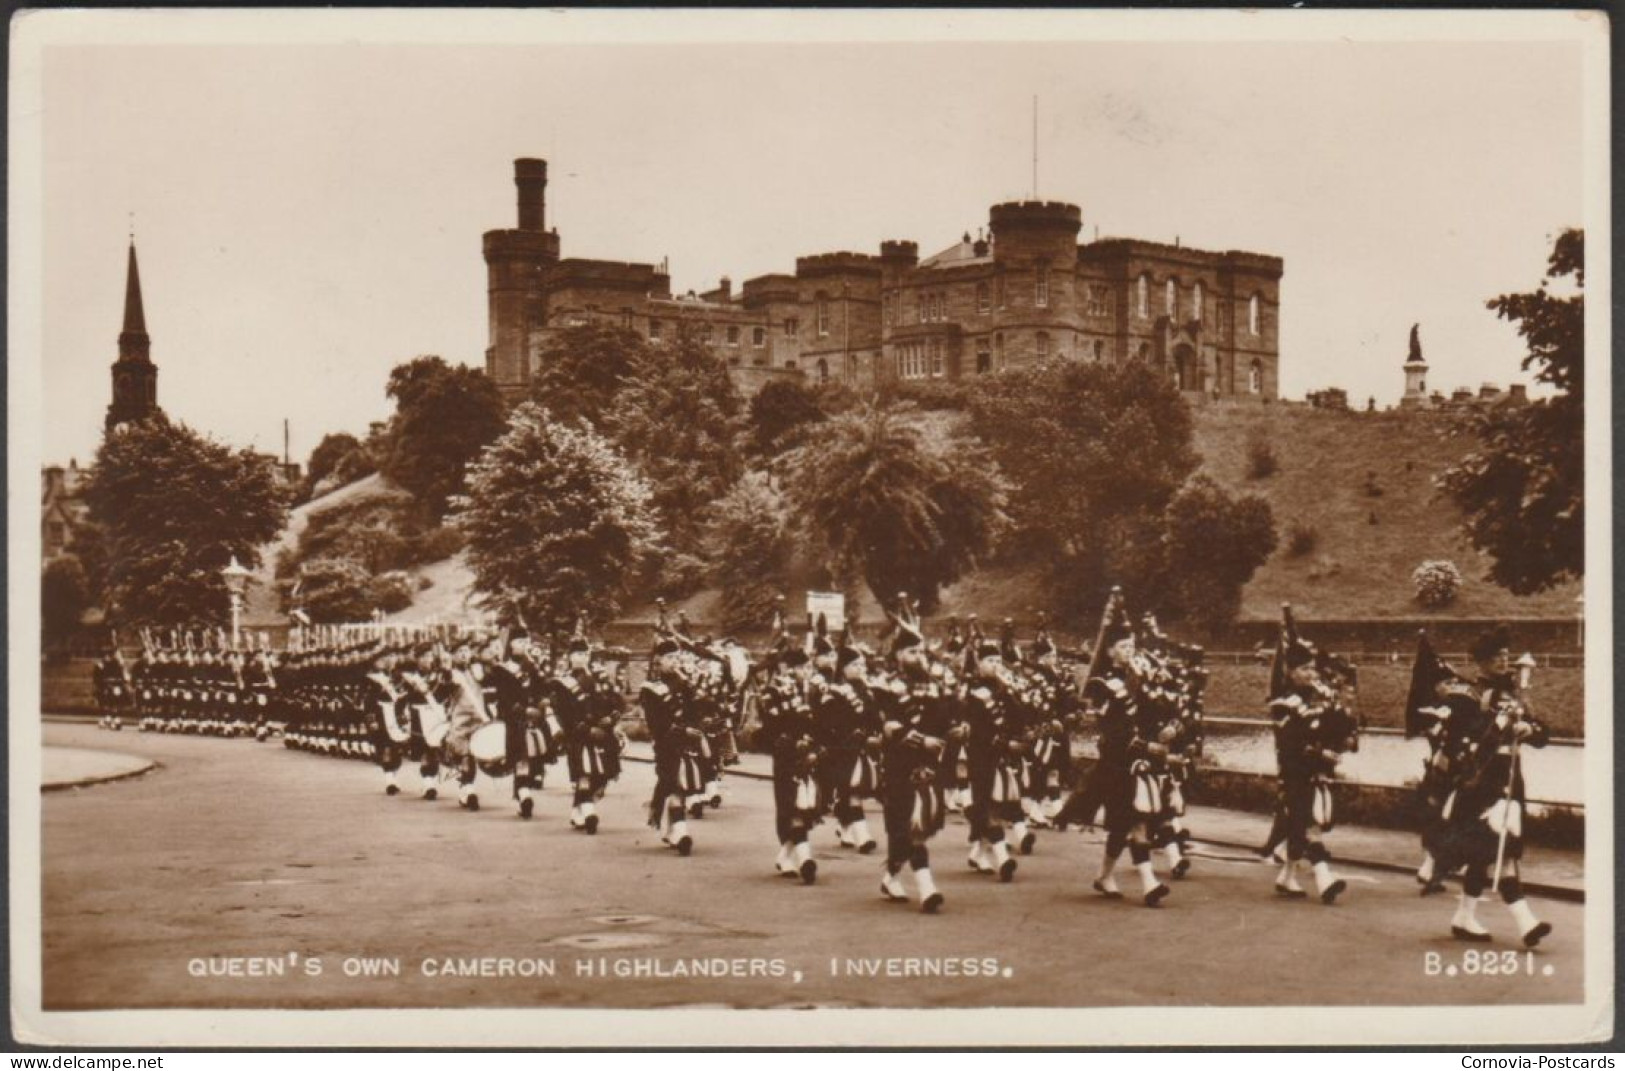 Queen's Own Cameron Highlanders, Inverness, 1955 - Valentine's RP Postcard - Inverness-shire